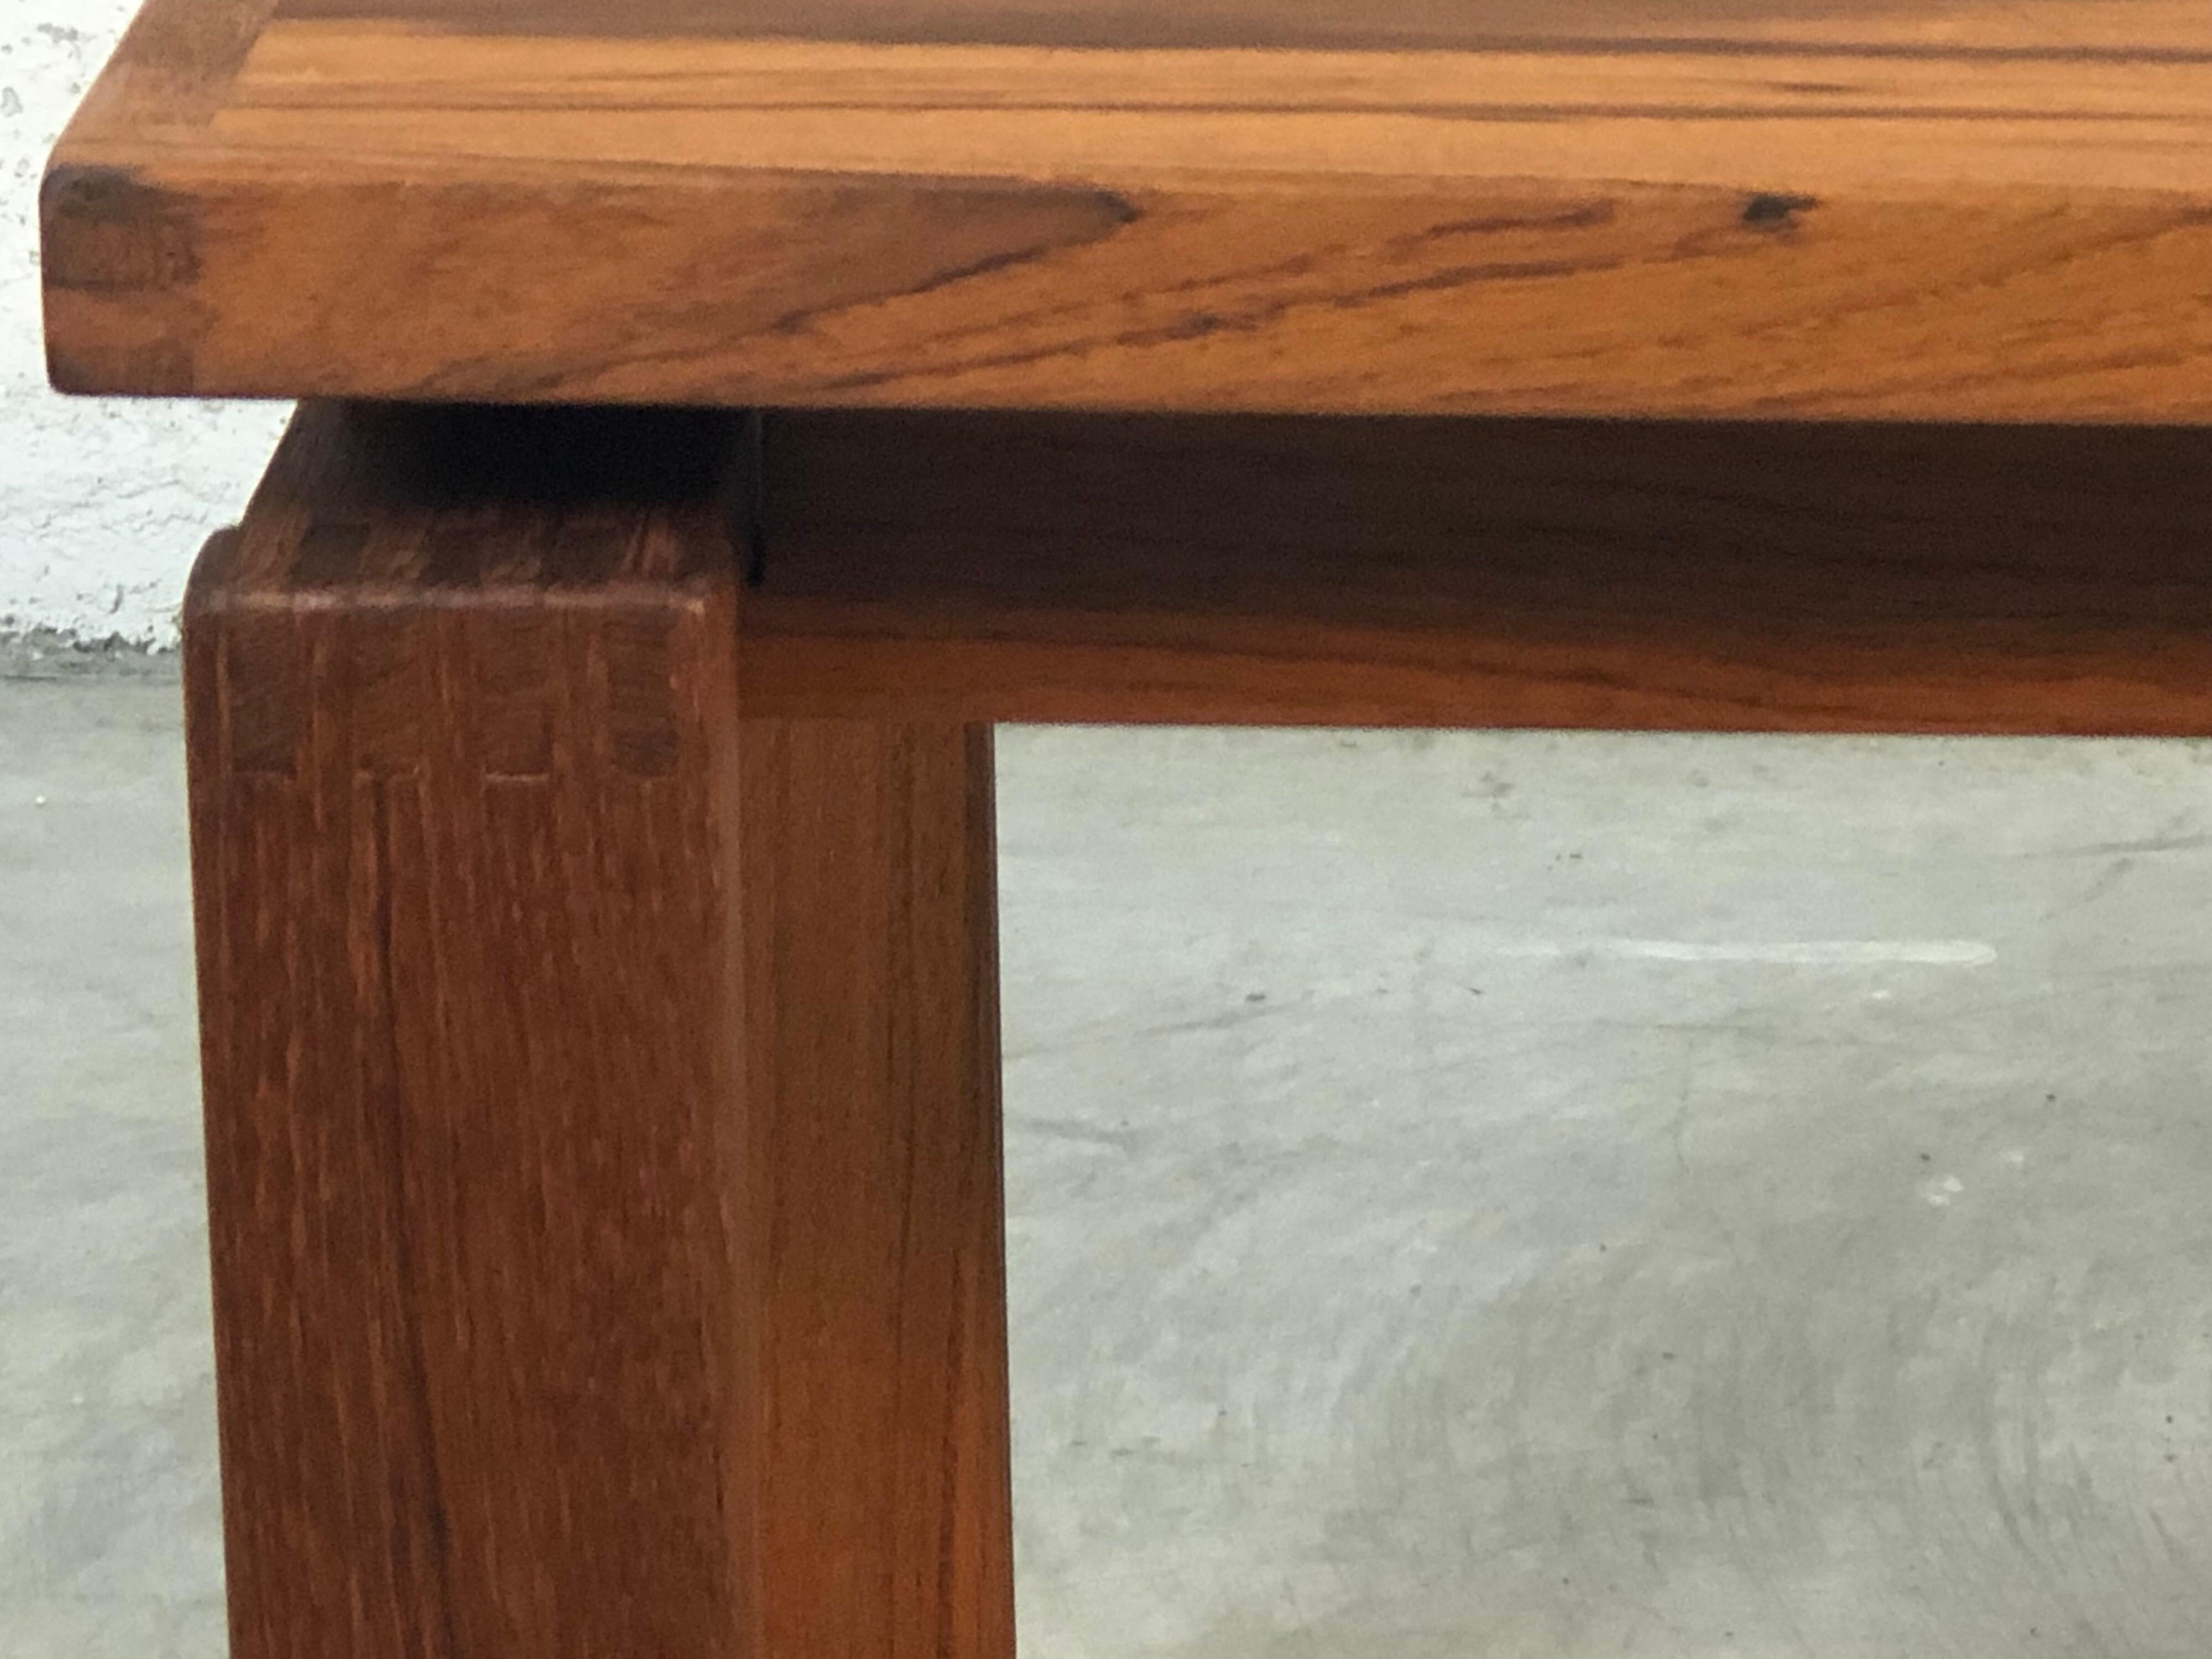 Vintage 1970s Danish teak rectangular table by Trioh. The table is in newly restored condition with a nice teak grain to the wood. Marked underneath.